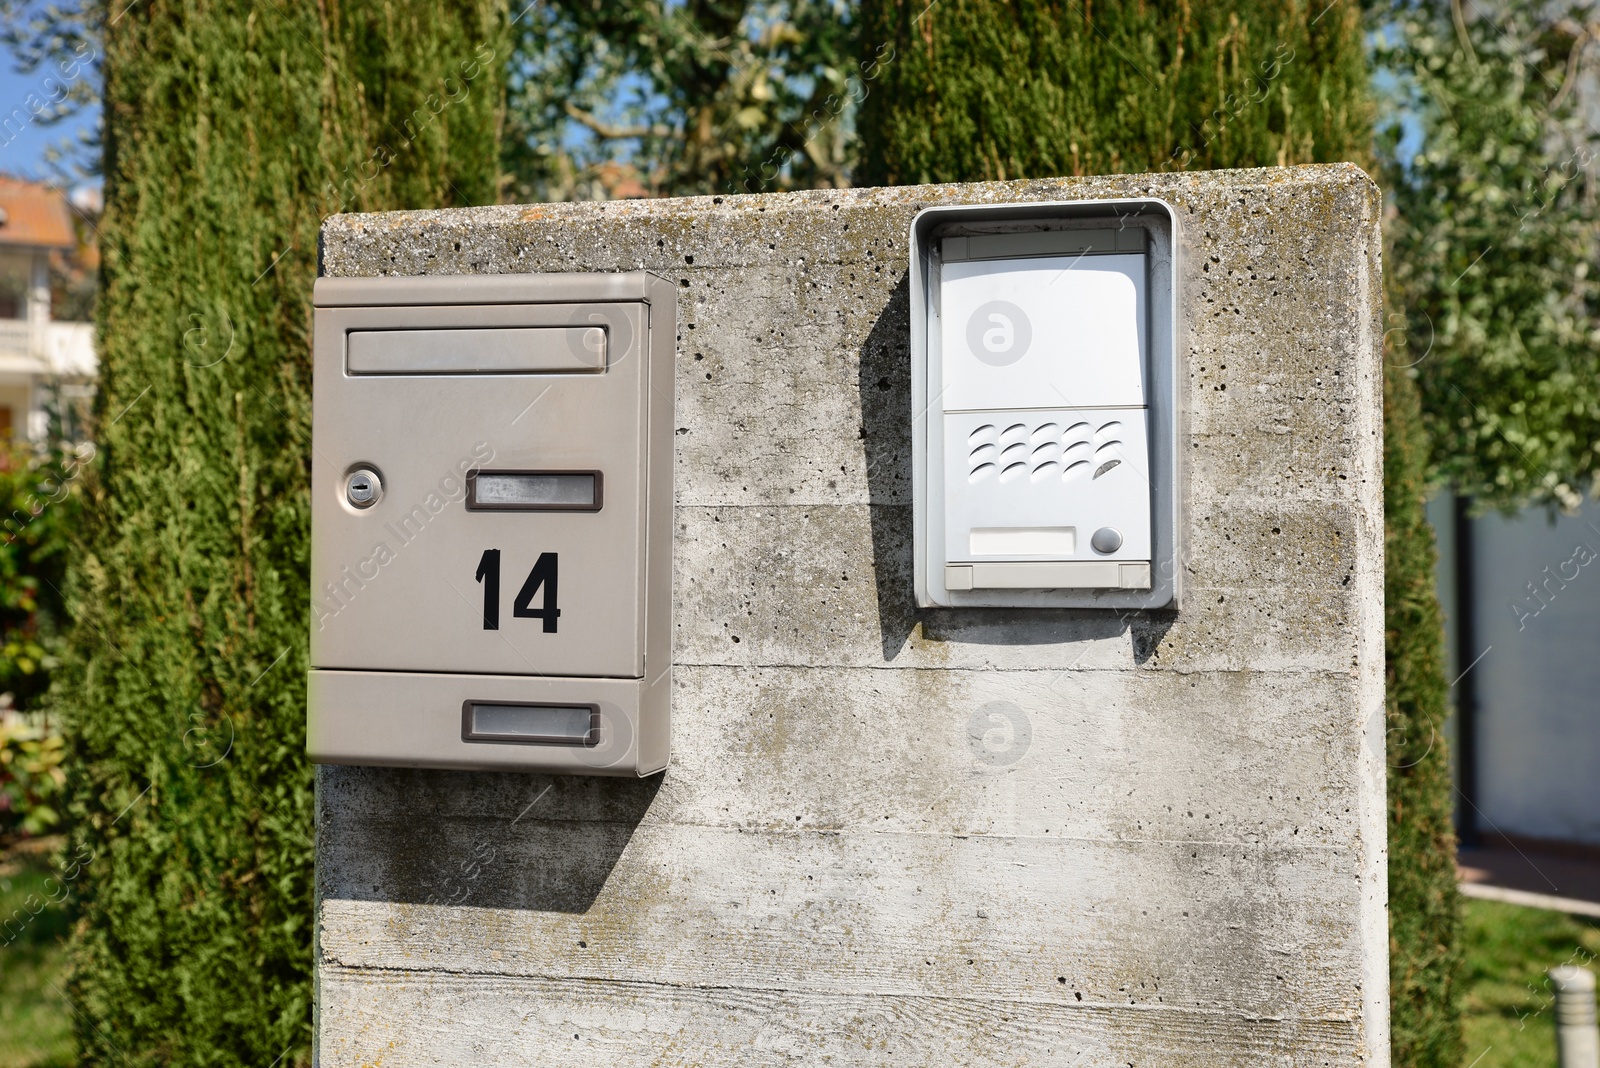 Photo of Mail box and intercom on grey concrete wall outdoors